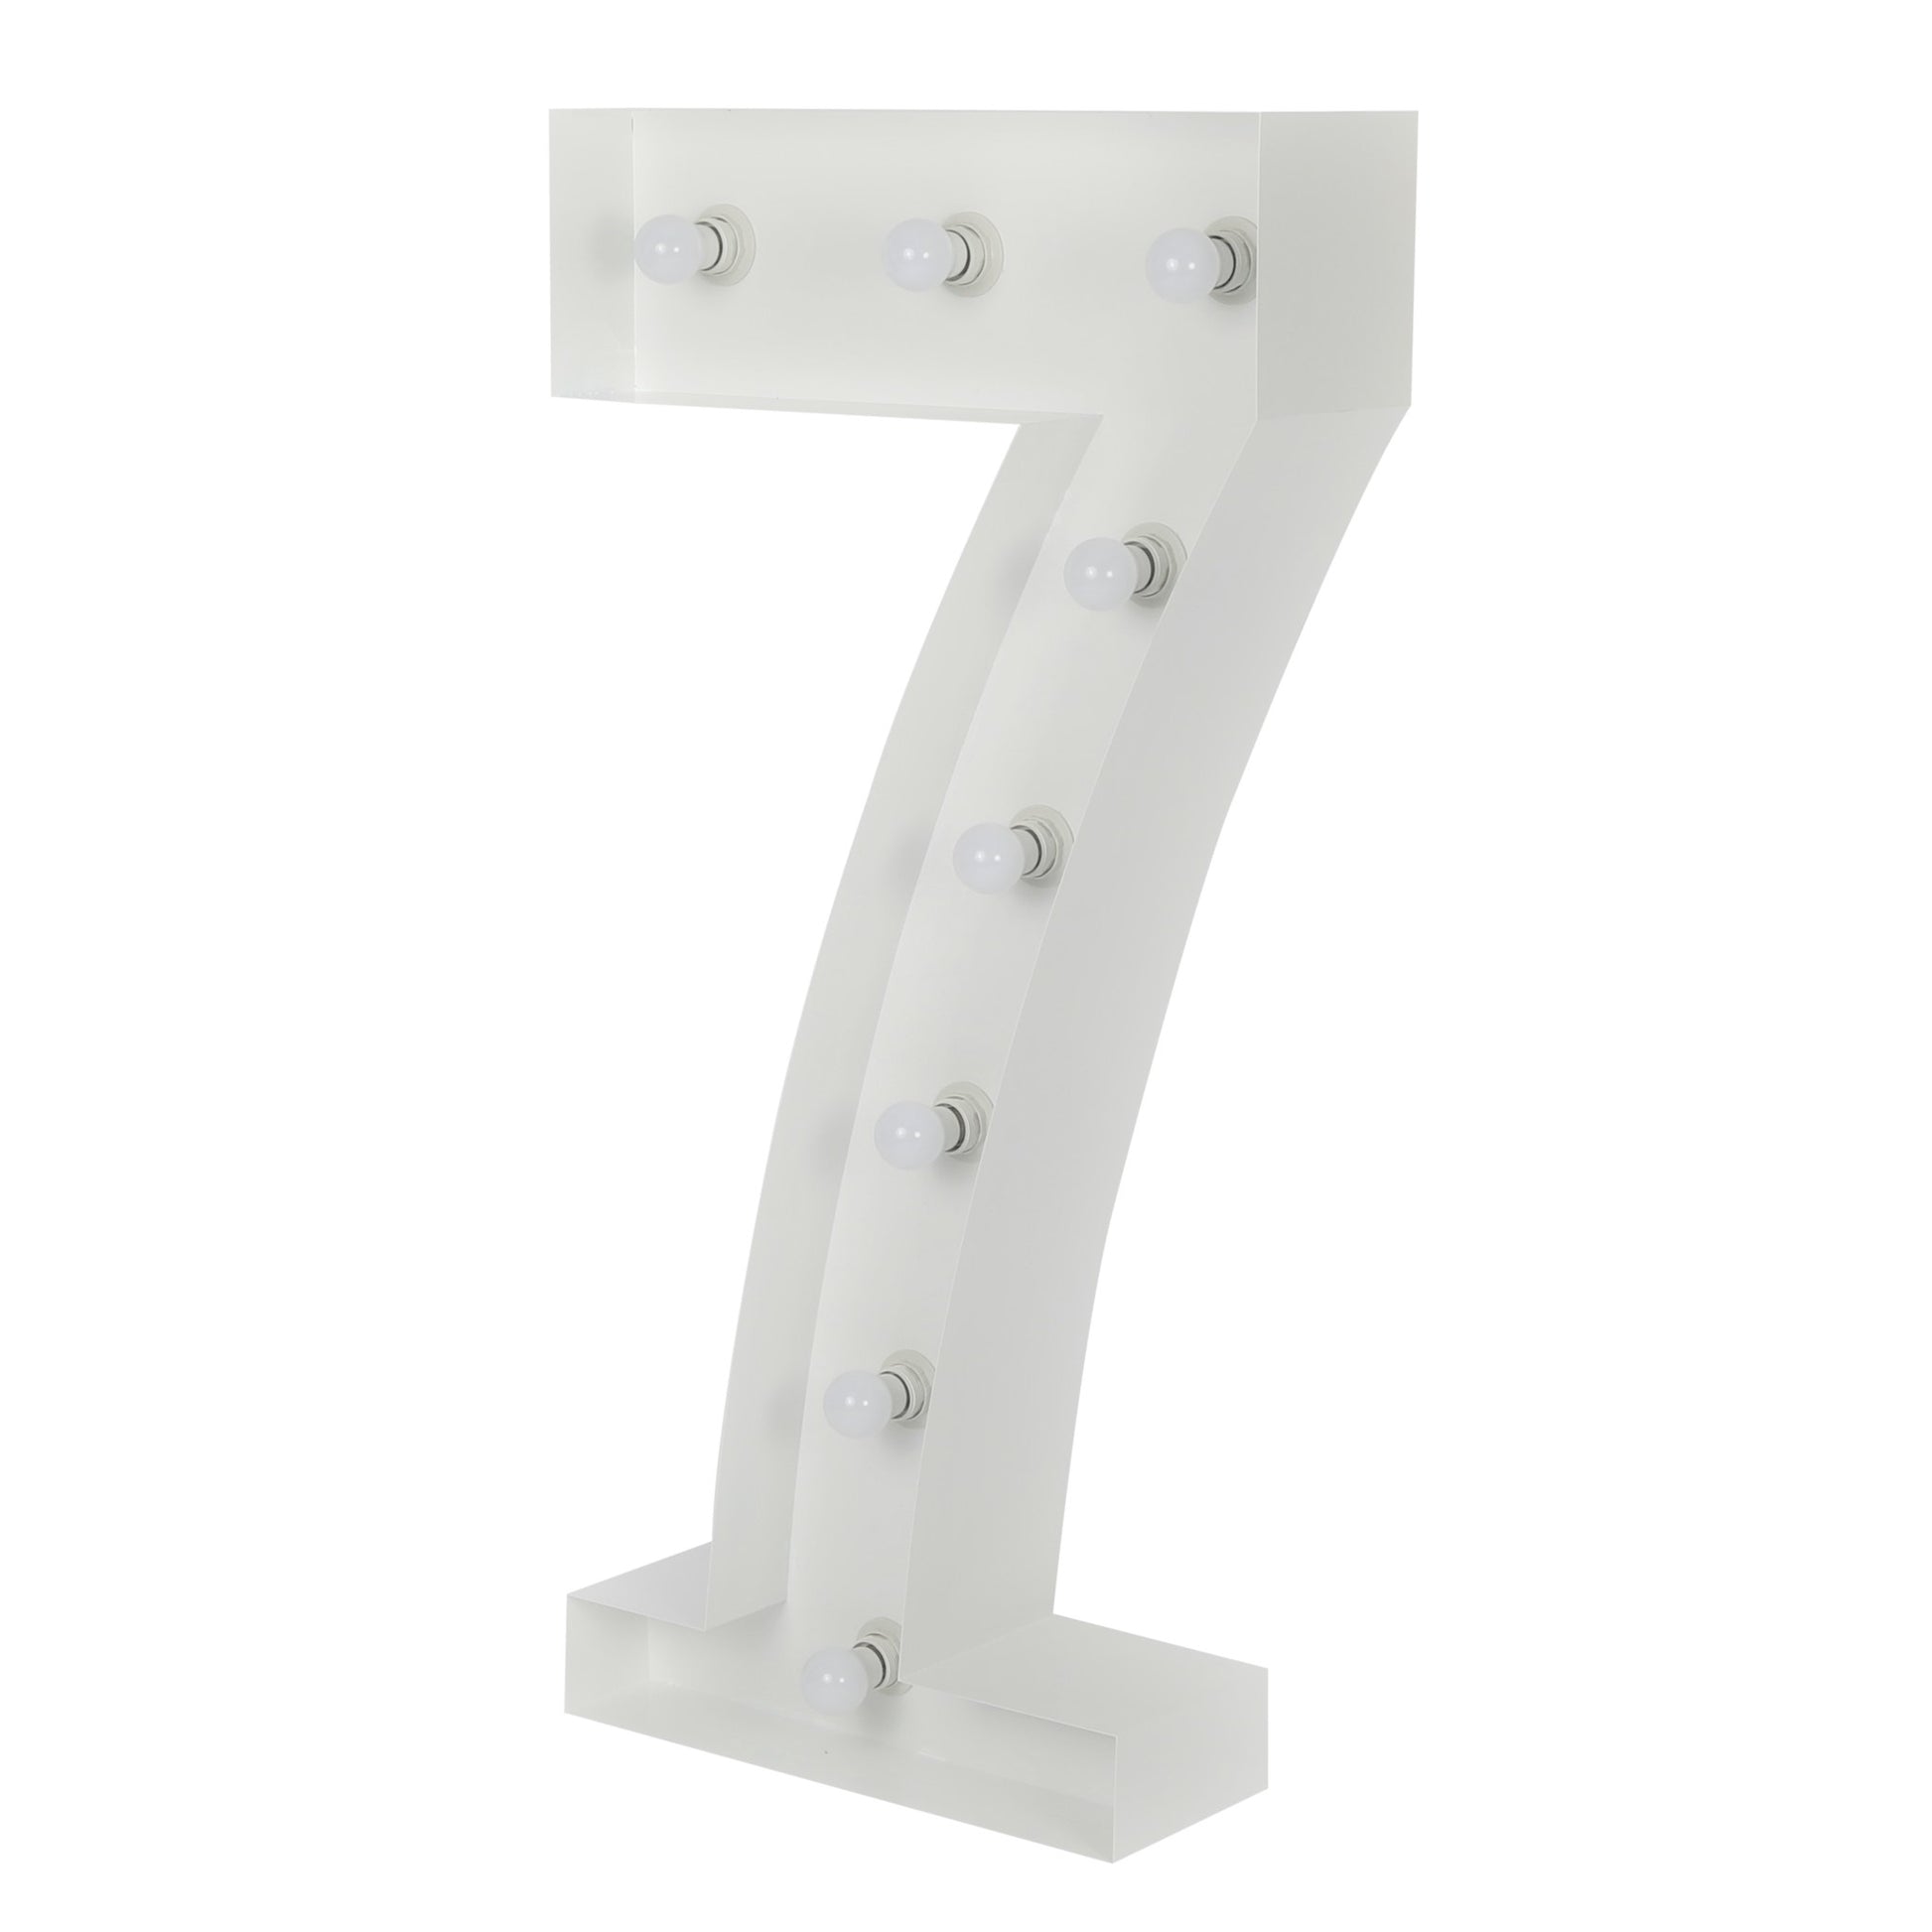 Marquee Light Up Numbers 4ft: Illuminate Your Celebration!